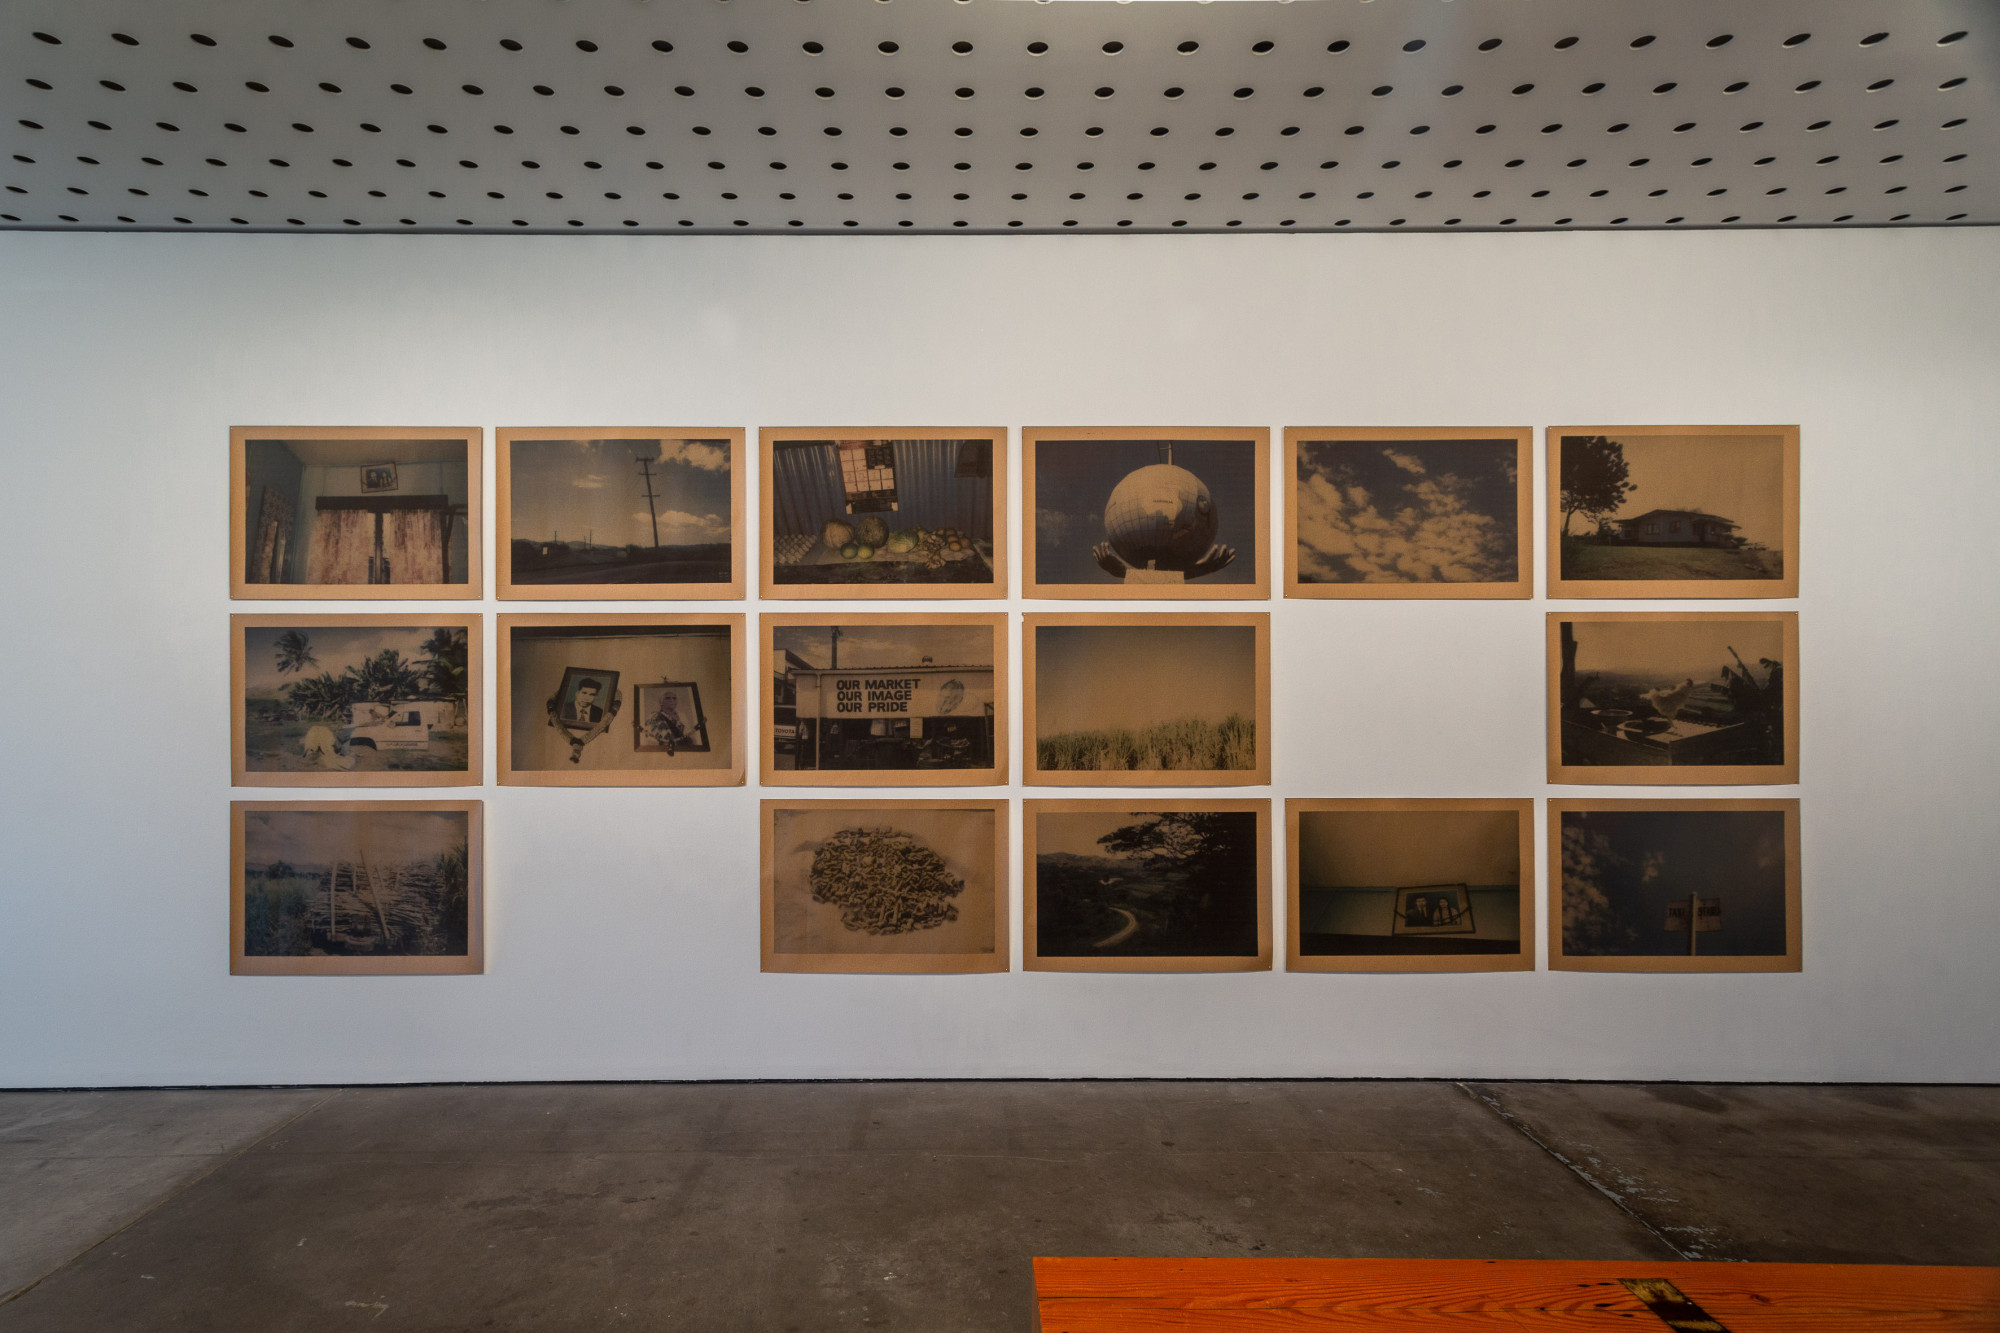 Installation view of Shivanjani Lal, <em>Chhaapaa</em>, 2020, 22 Polaroid prints on brown paper, 91.6 x 63.7 cm each, Centre for Contemporary Photography. Image courtesy of CCP. Photo: J Forsyth